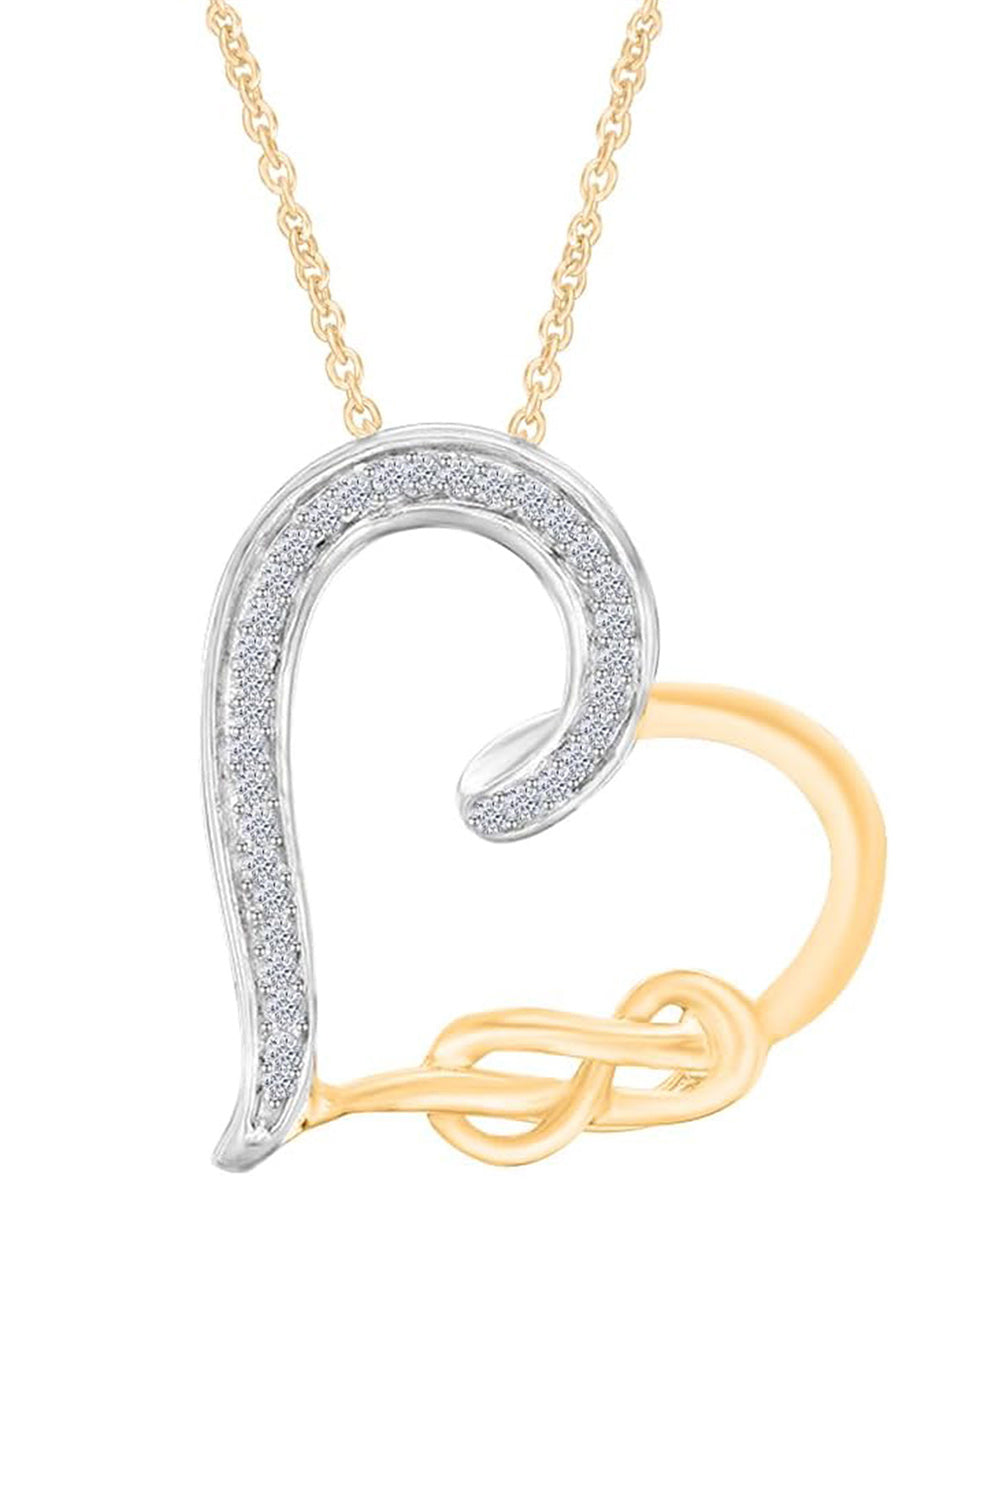 Yellow Gold Color Infinity Knot Heart Pendant Necklace